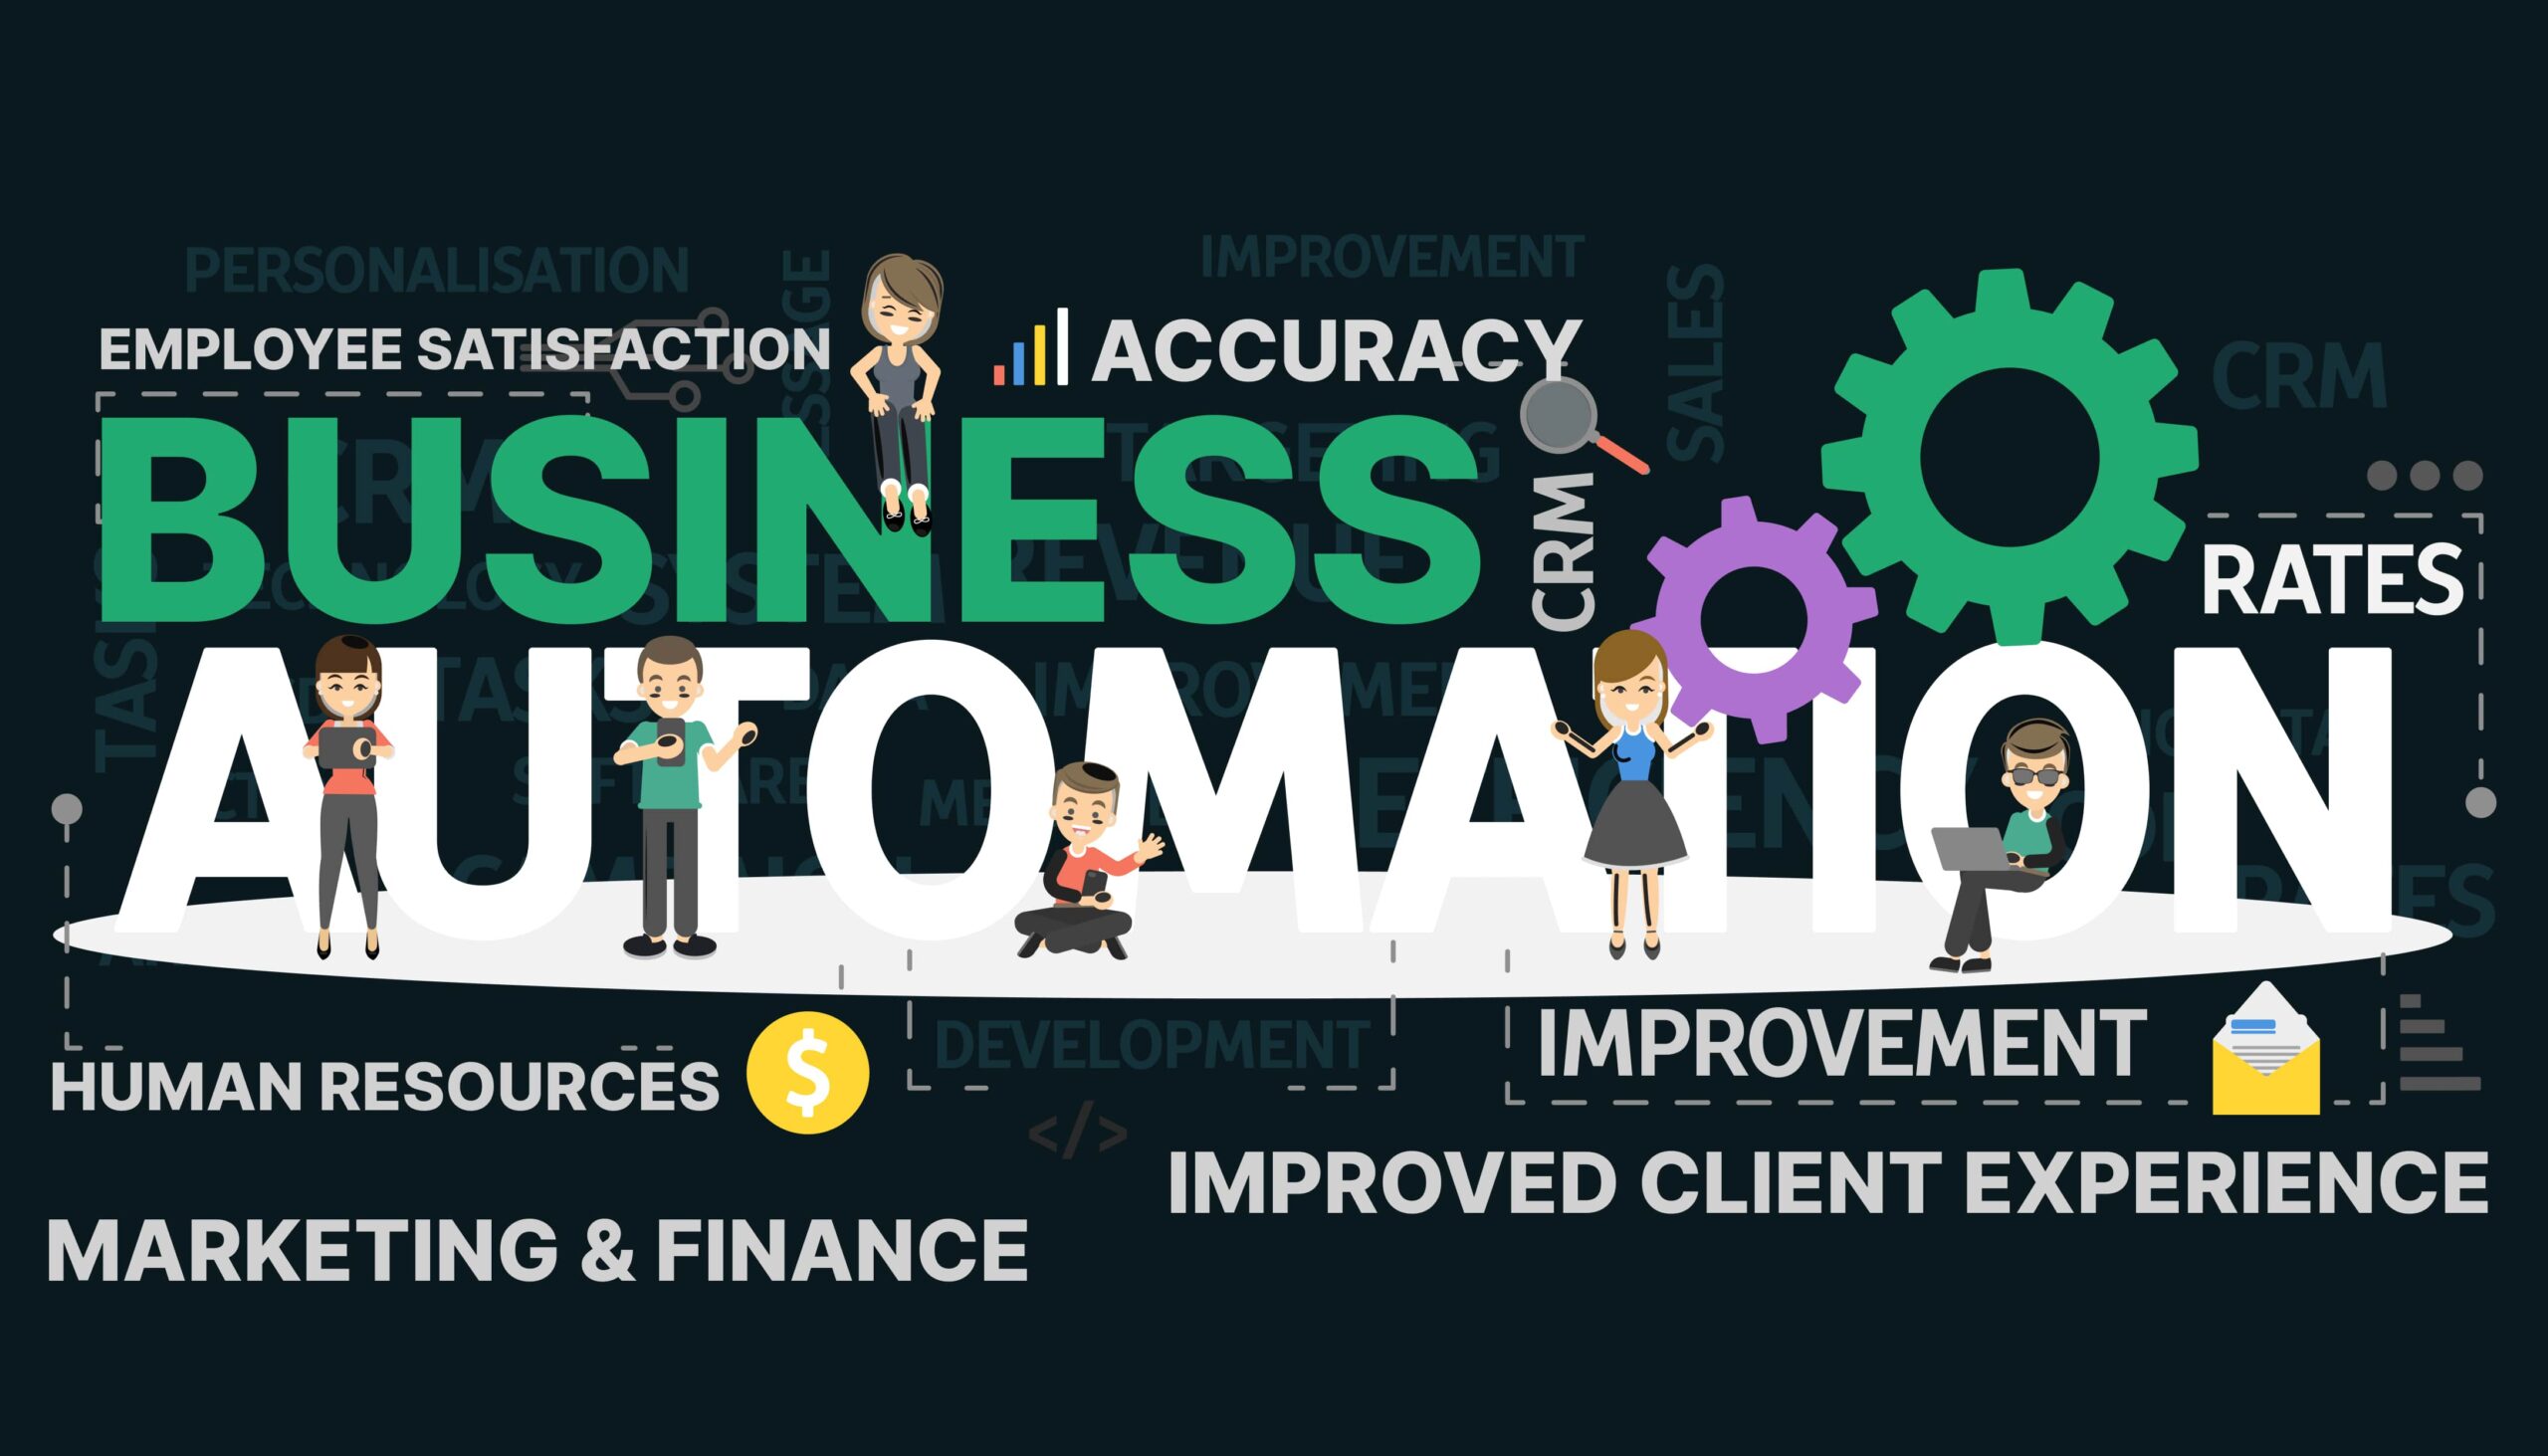 BUSINESS AUTOMATION